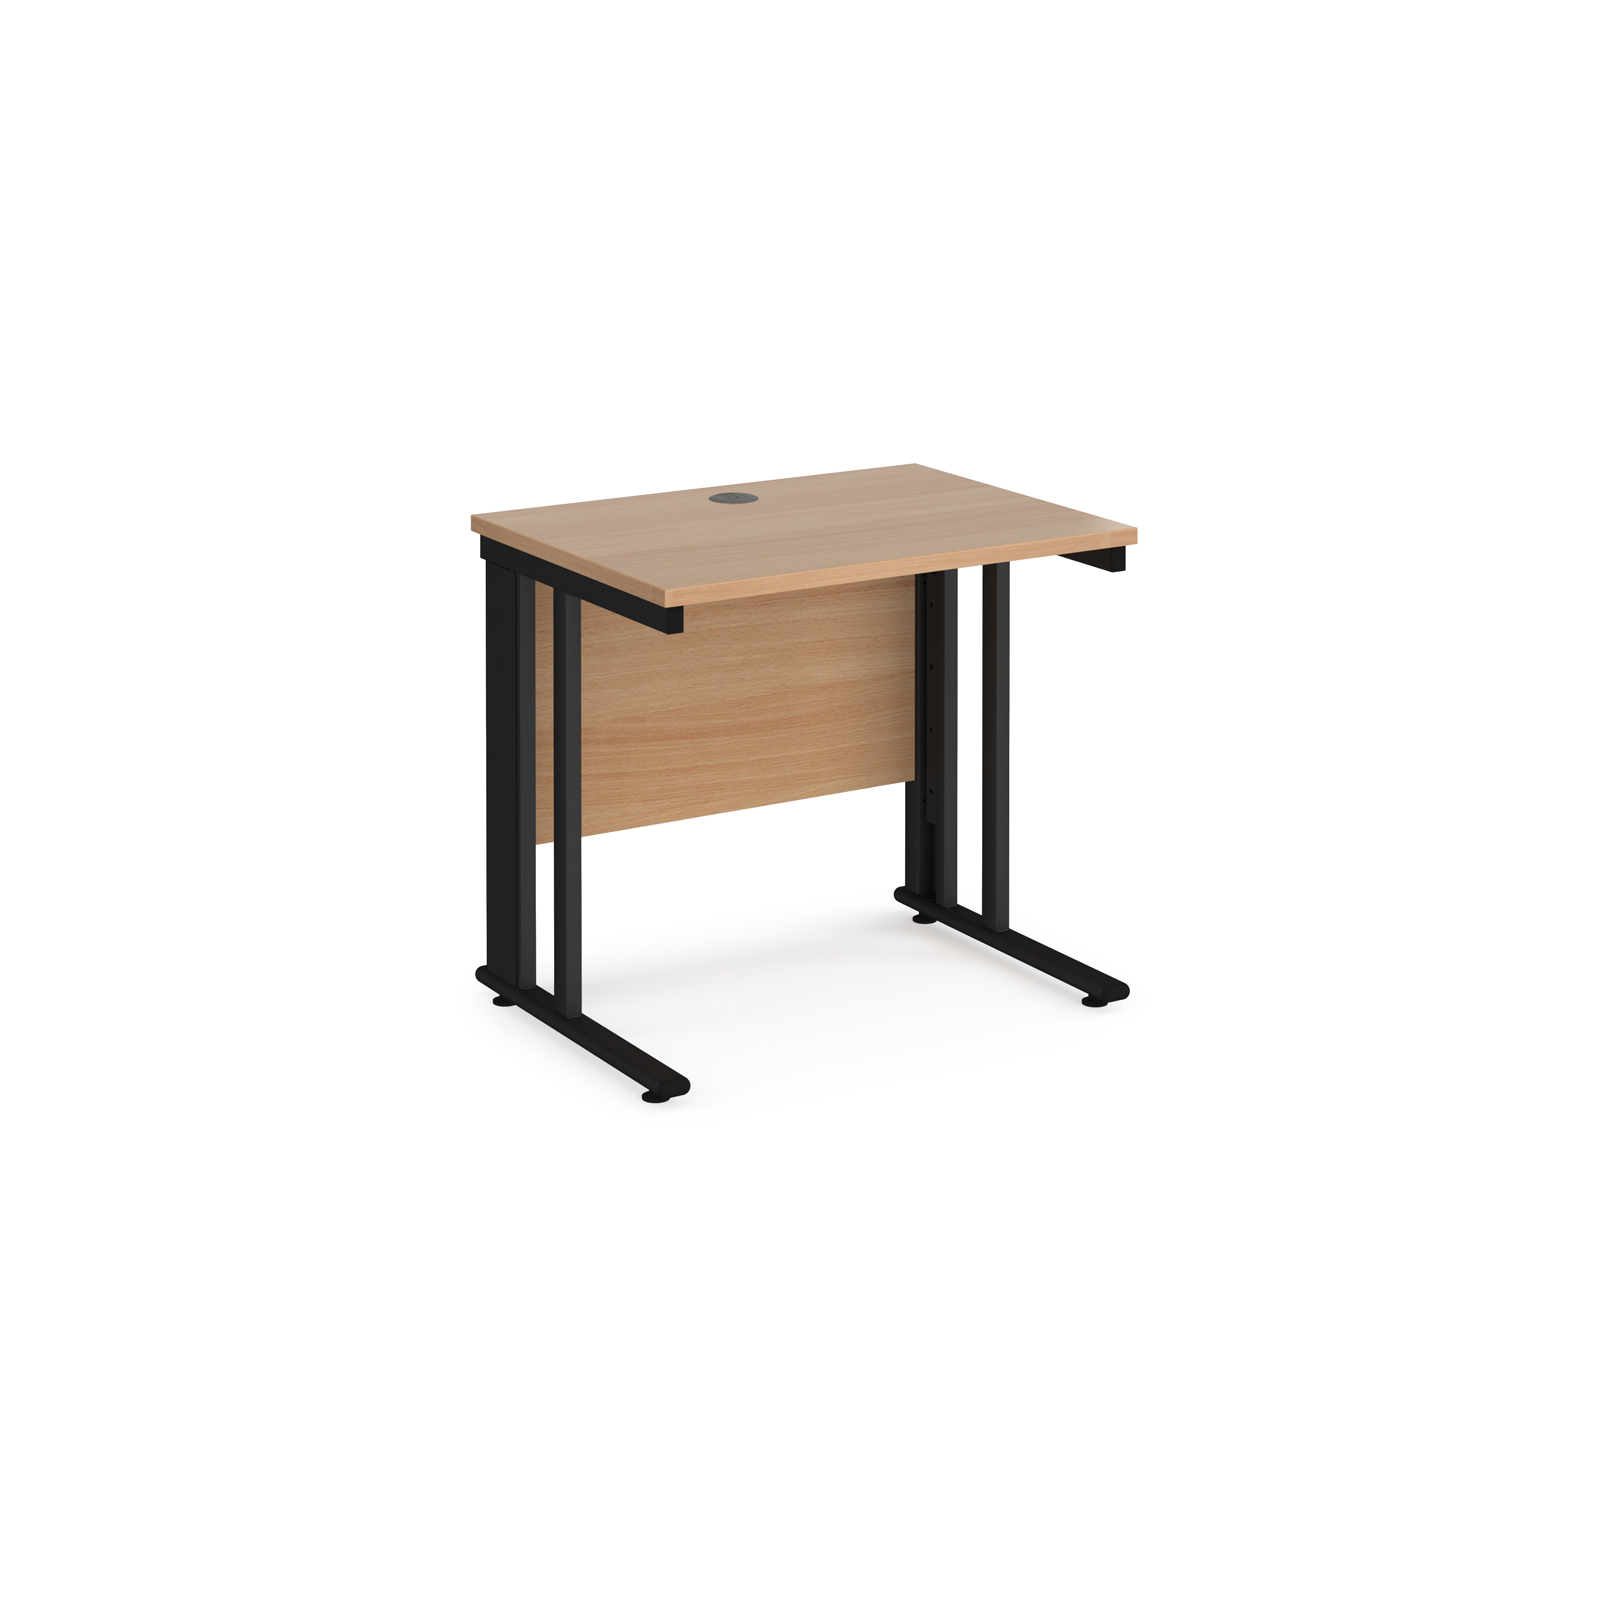 Maestro 25 straight desk 800mm x 600mm - black cable managed leg frame, beech top